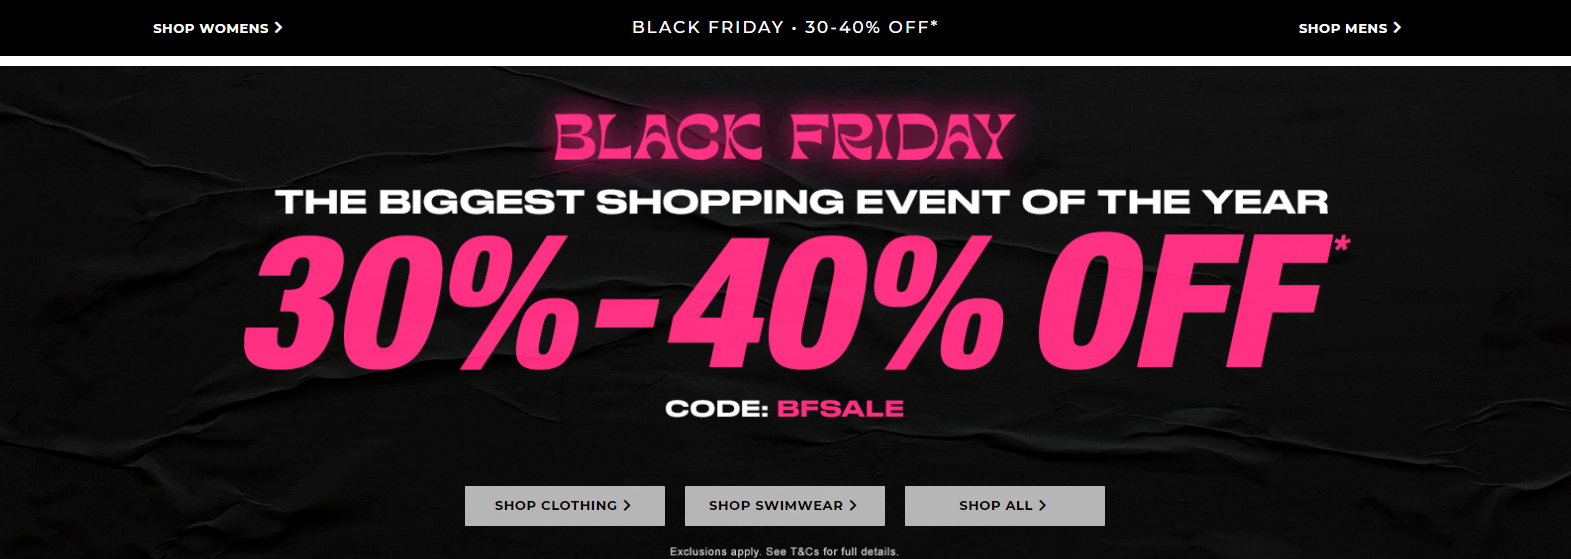 Surfstitch Black Friday extra 30-40% OFF with coupon on clothing, swimwear & more